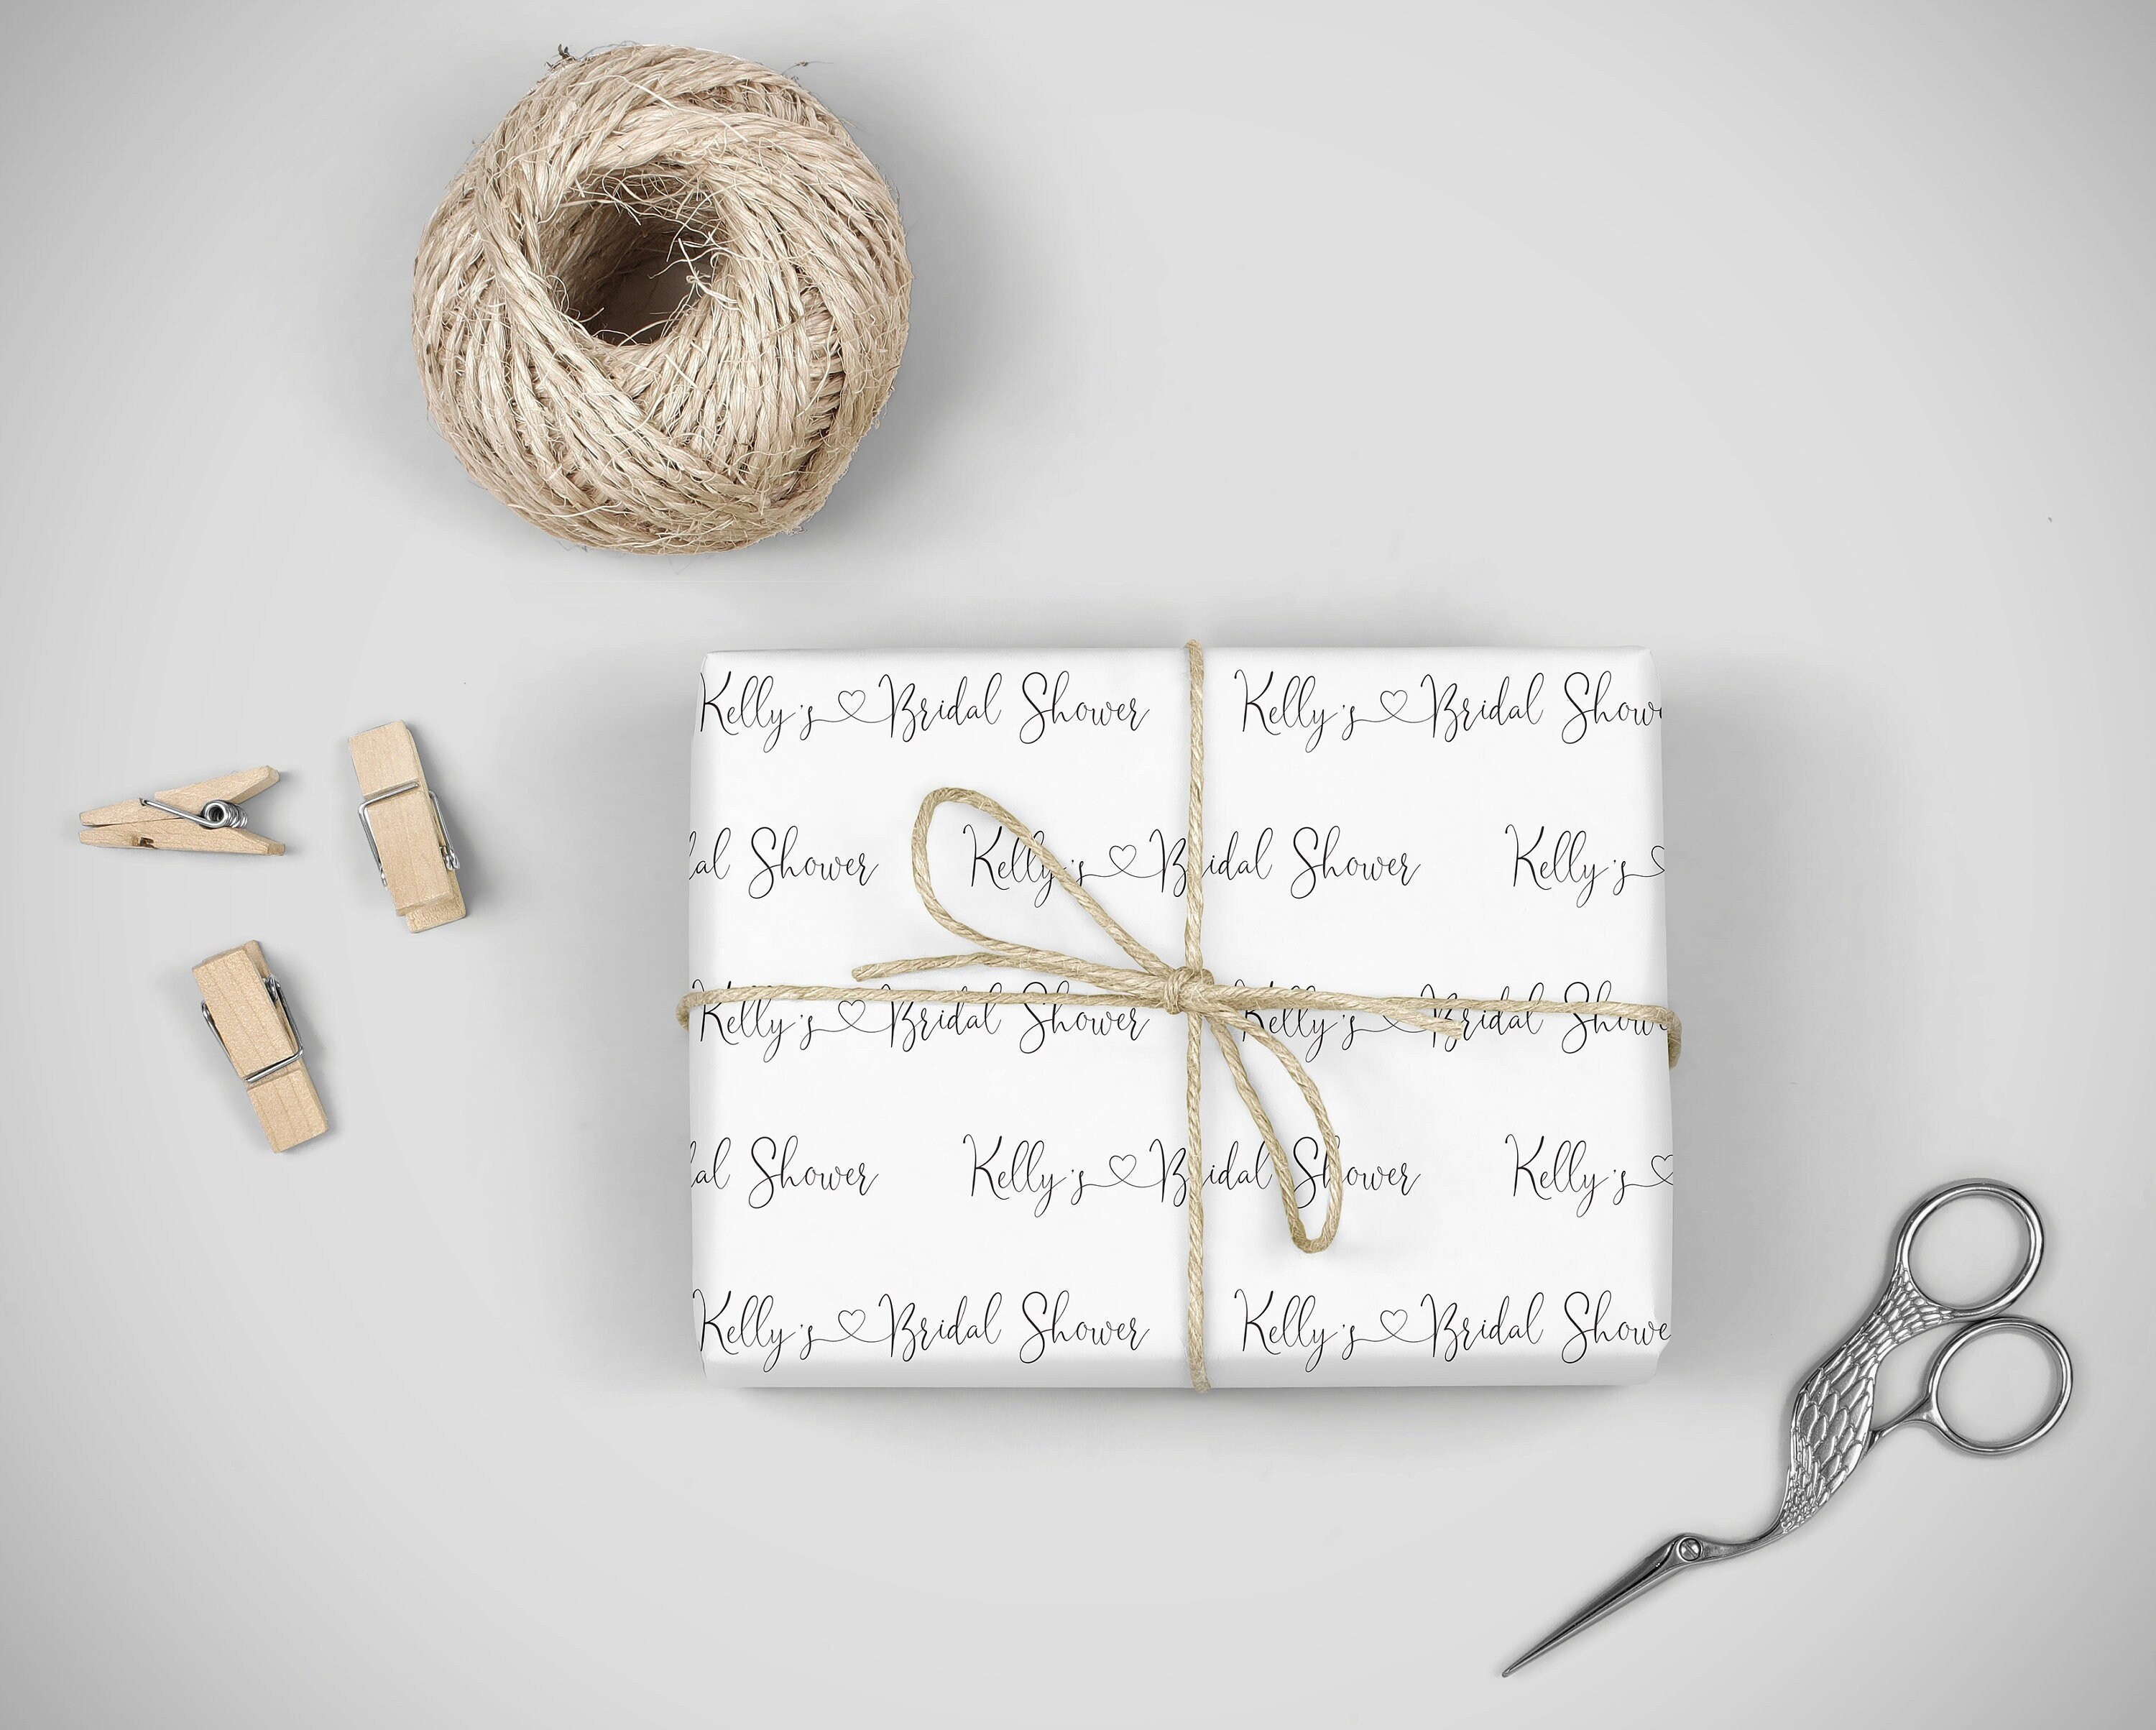 Personalized Green Bridal Shower Wrapping Paper, Zazzle